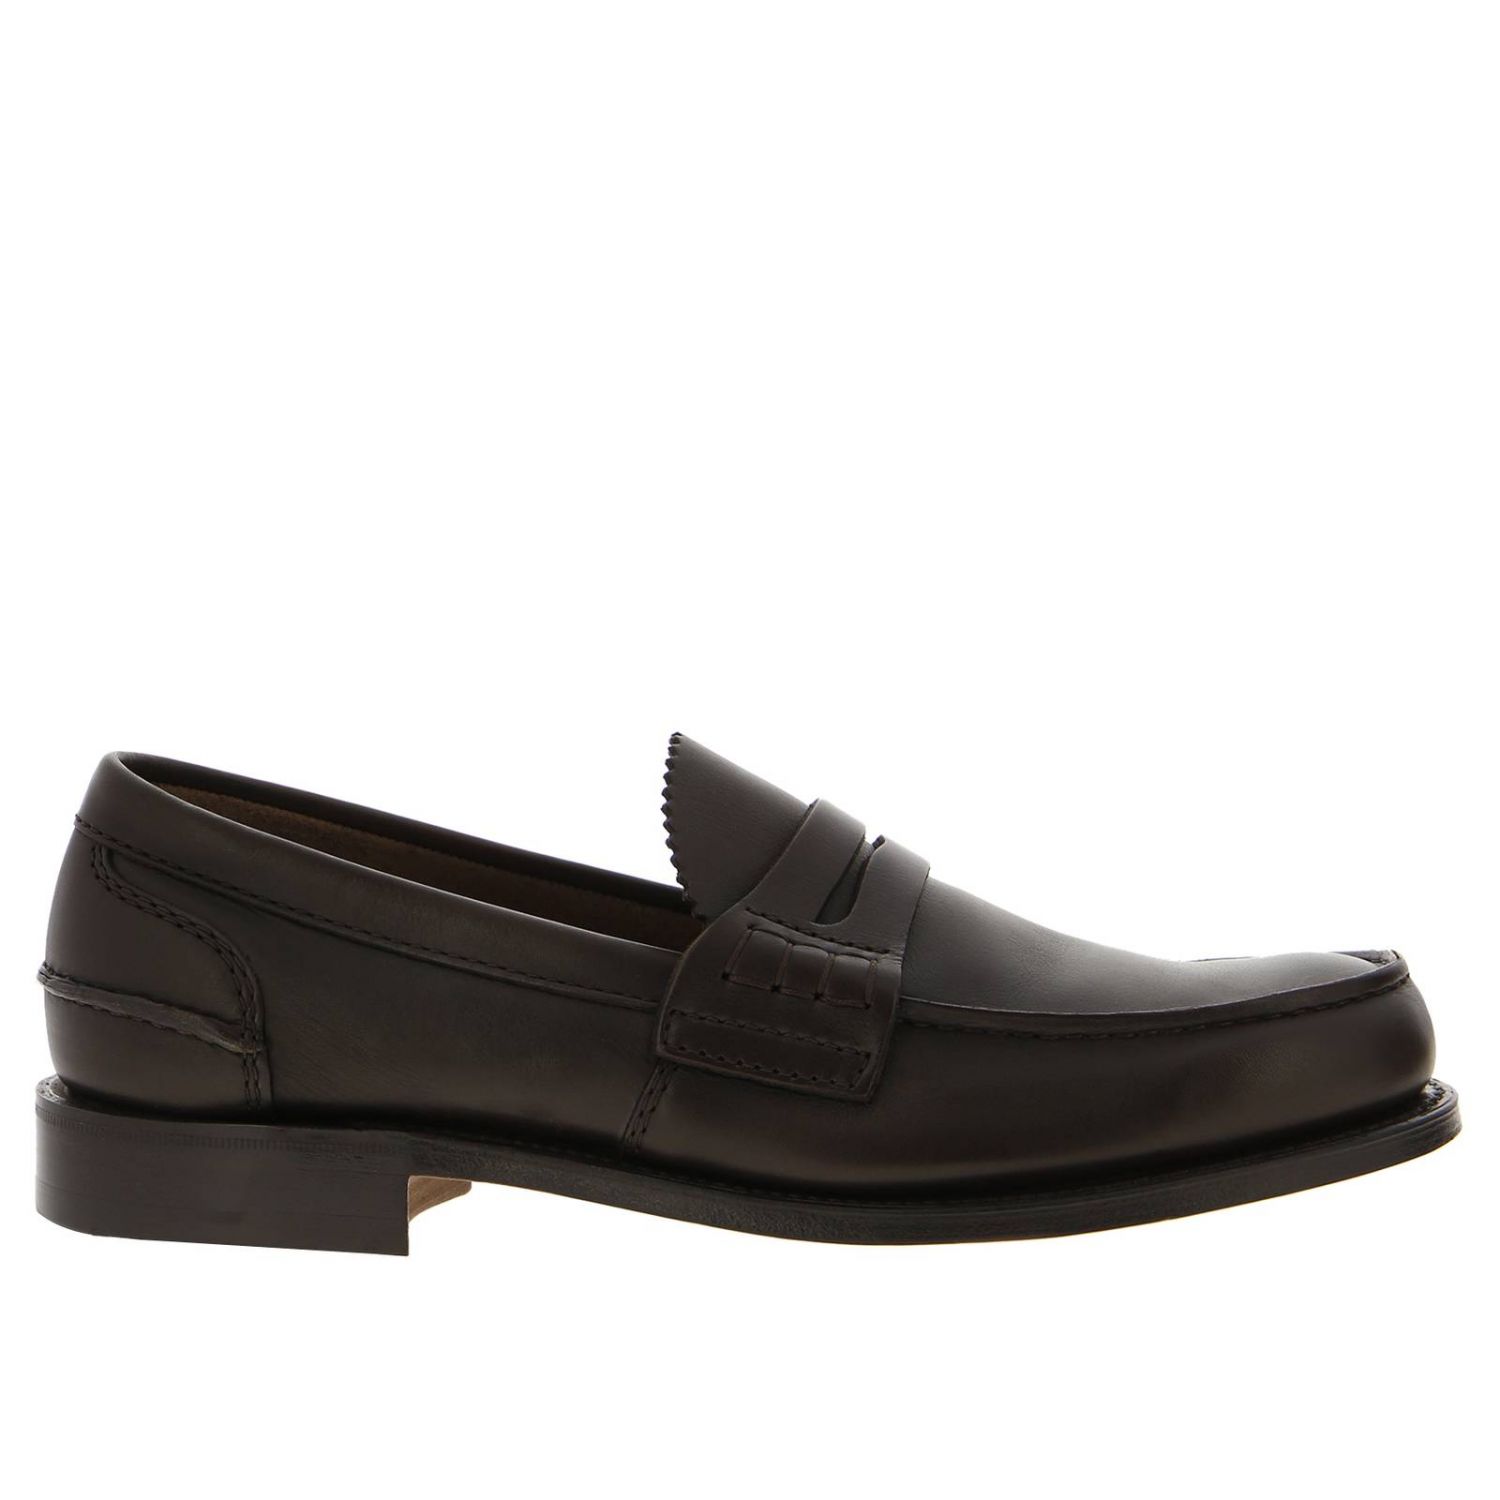 Shoes men Church's | Loafers Church's Men Brown | Loafers Church's ...